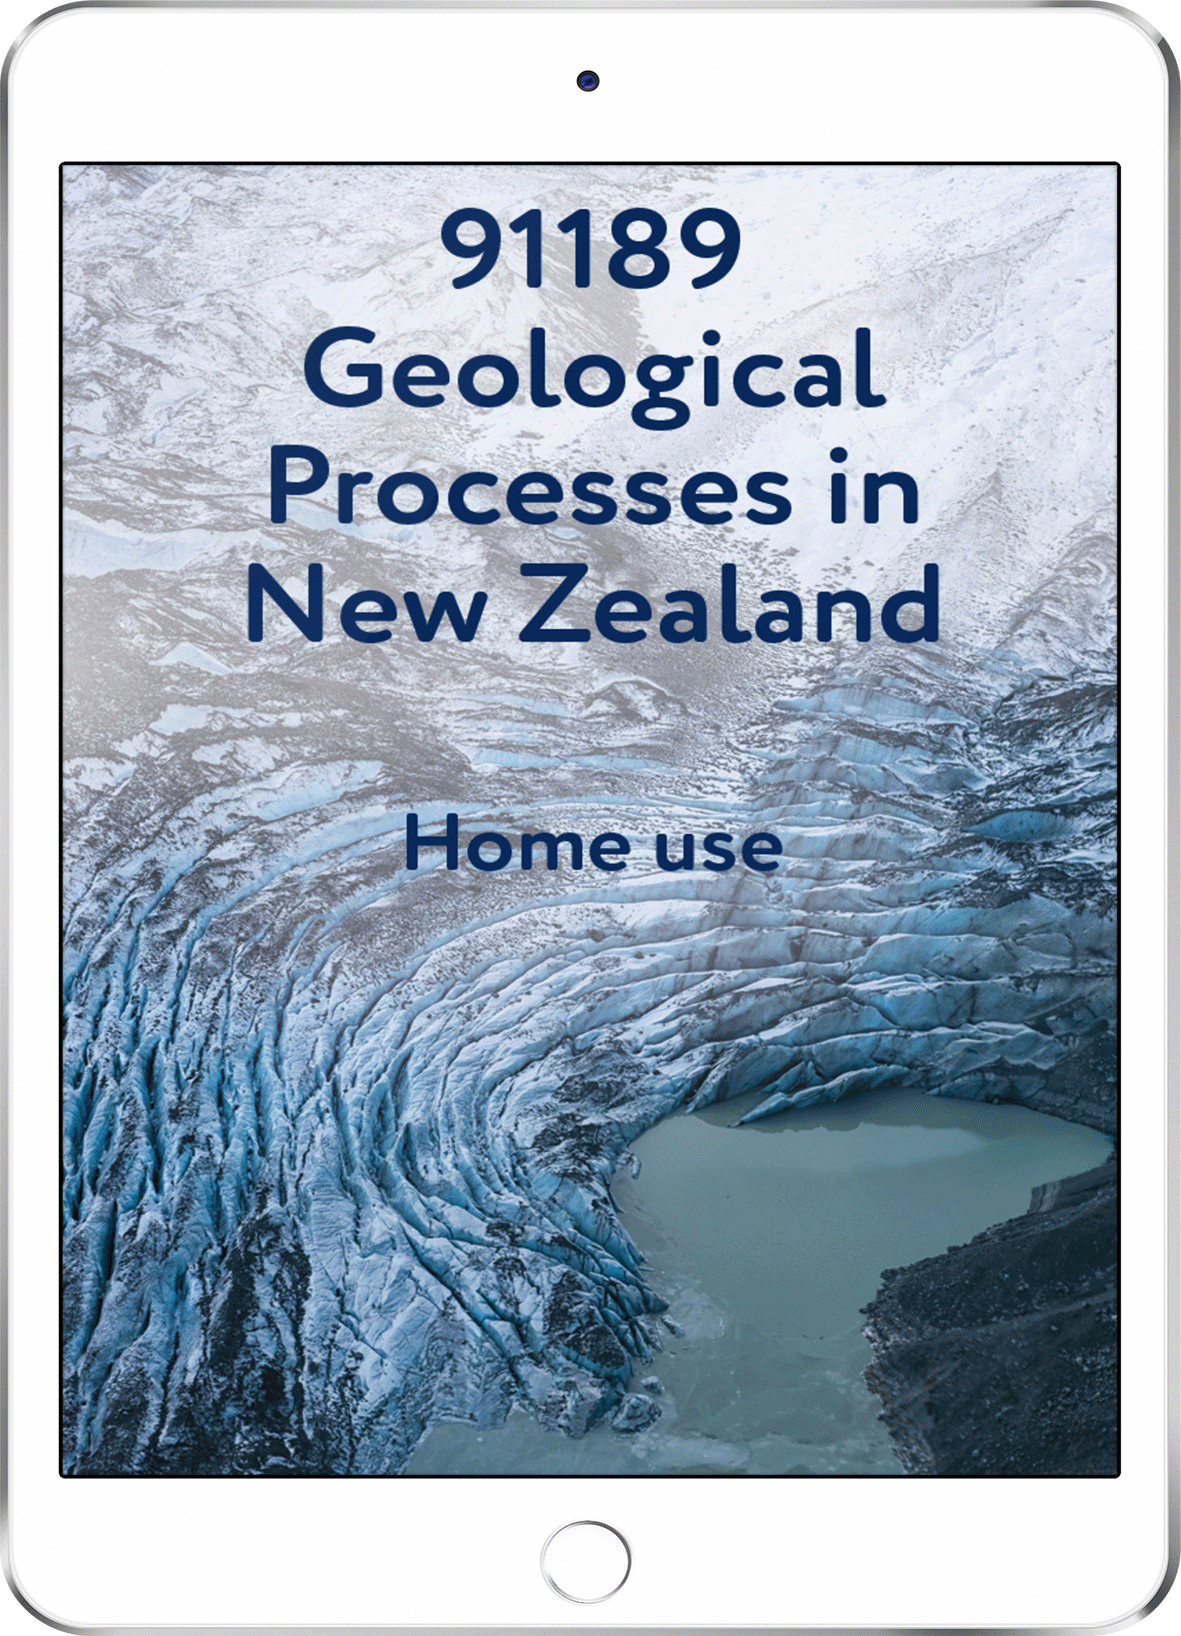 91189 Geological Processes in New Zealand - Home Use